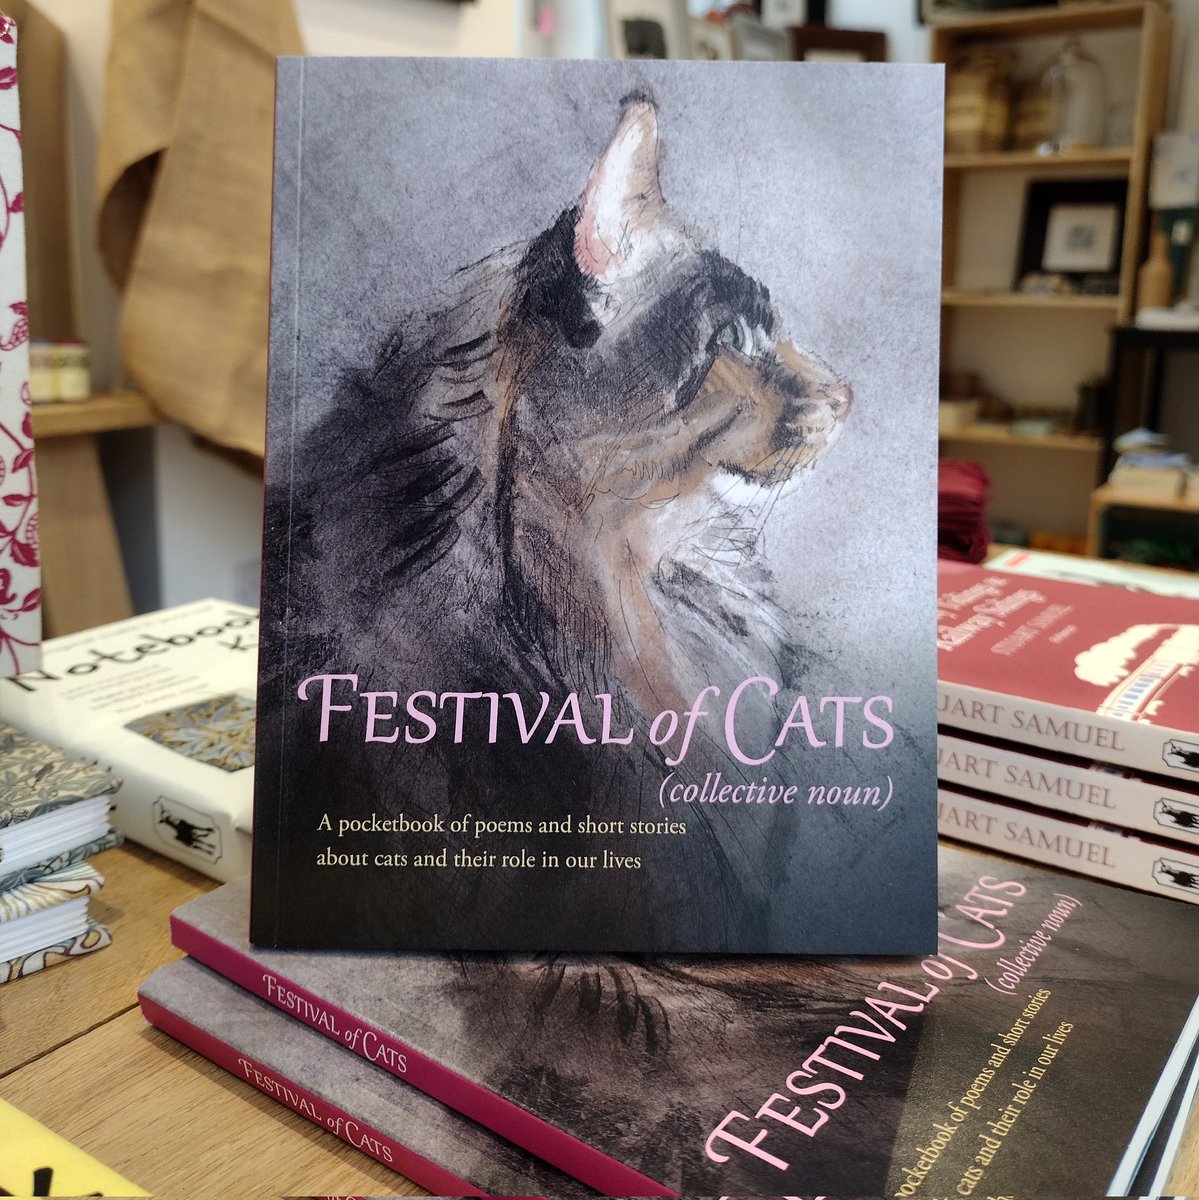 It's PUBLICATION DAY for poetry and short story collection #FestivalofCats #anthology #NewRelease 'A delightful and heart warming collection... A lovely reminder of the privilege of being chosen to be part of a cat's life' ⭐⭐⭐⭐⭐ Goodreads review